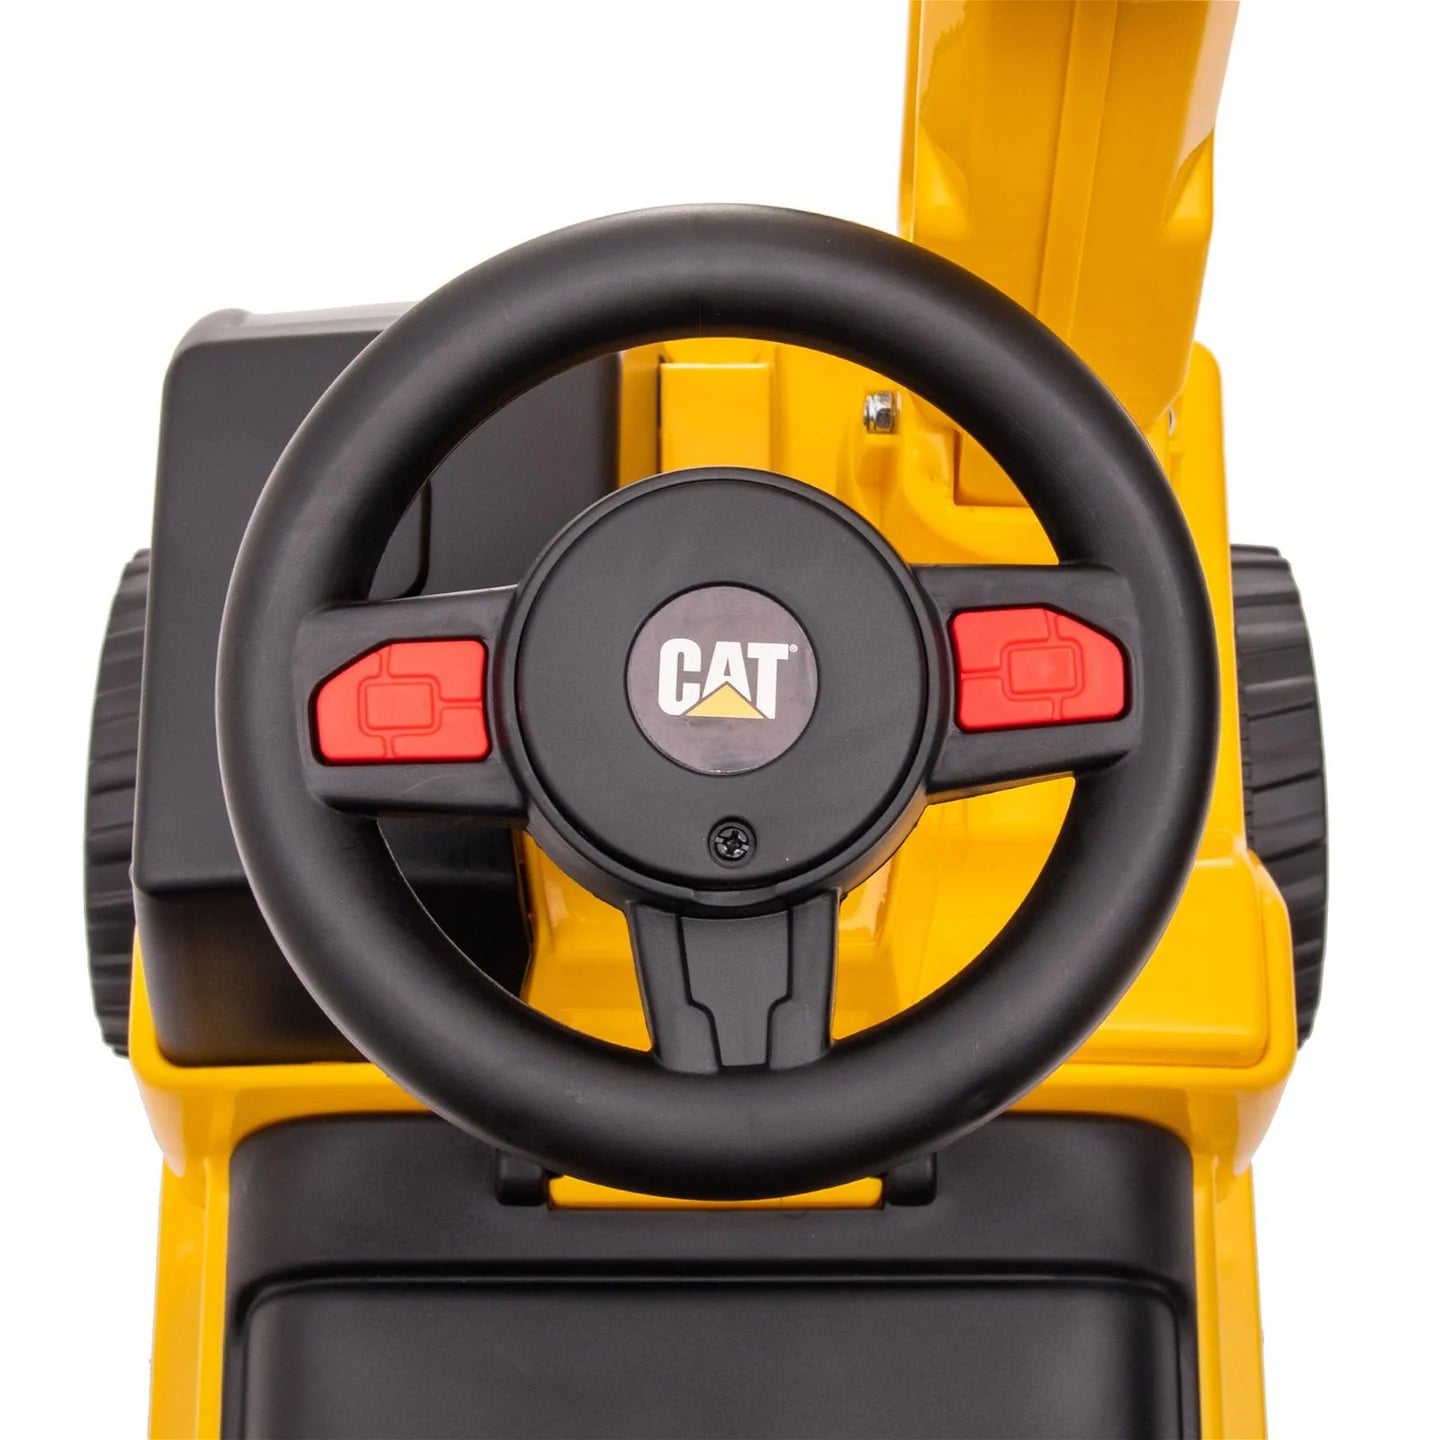 Caterpillar Foot to Floor Ride-on for Toddlers SpadezStore